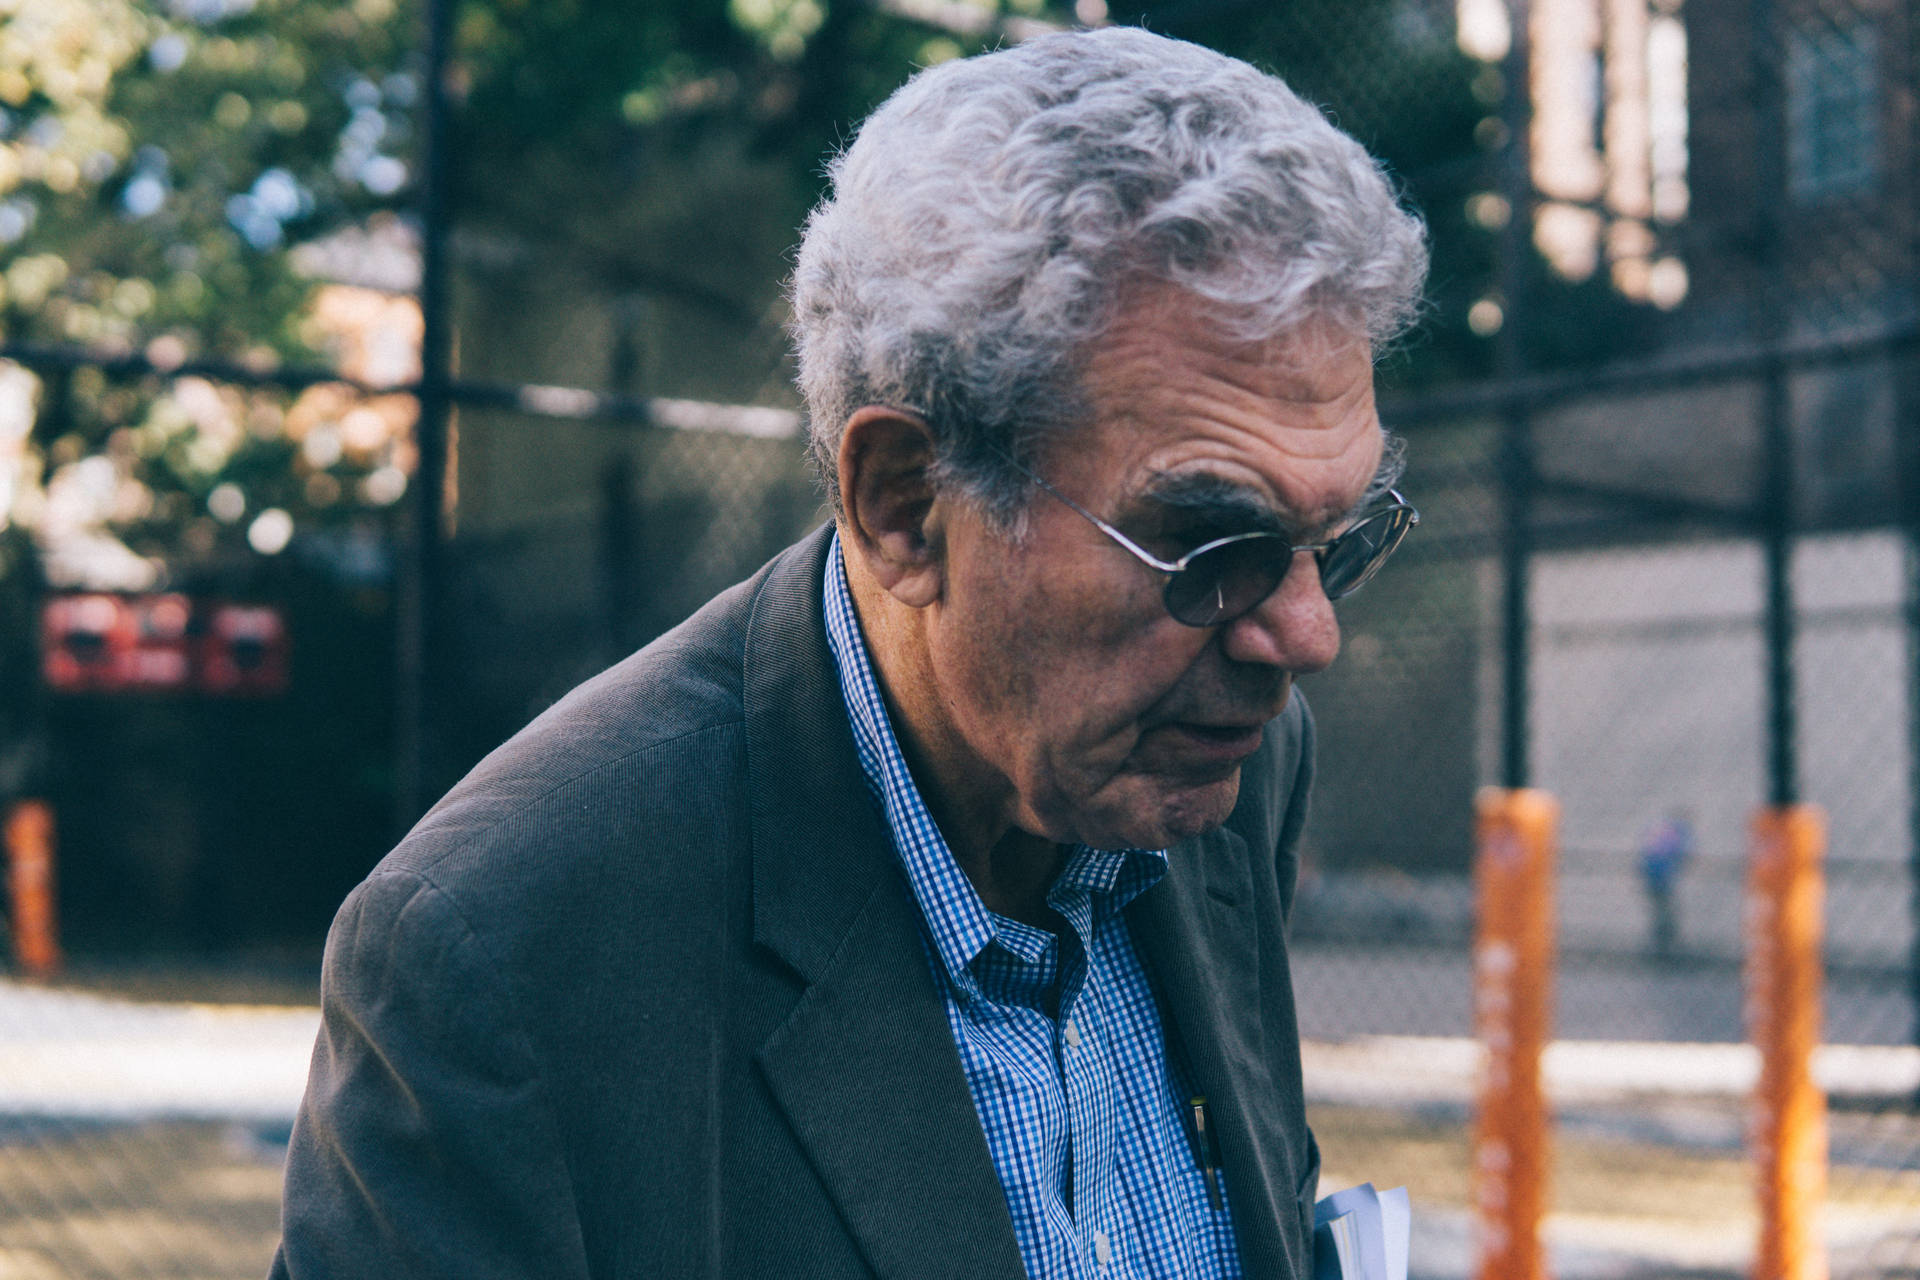 Elderly Man With Sunglasses And Gray Hair